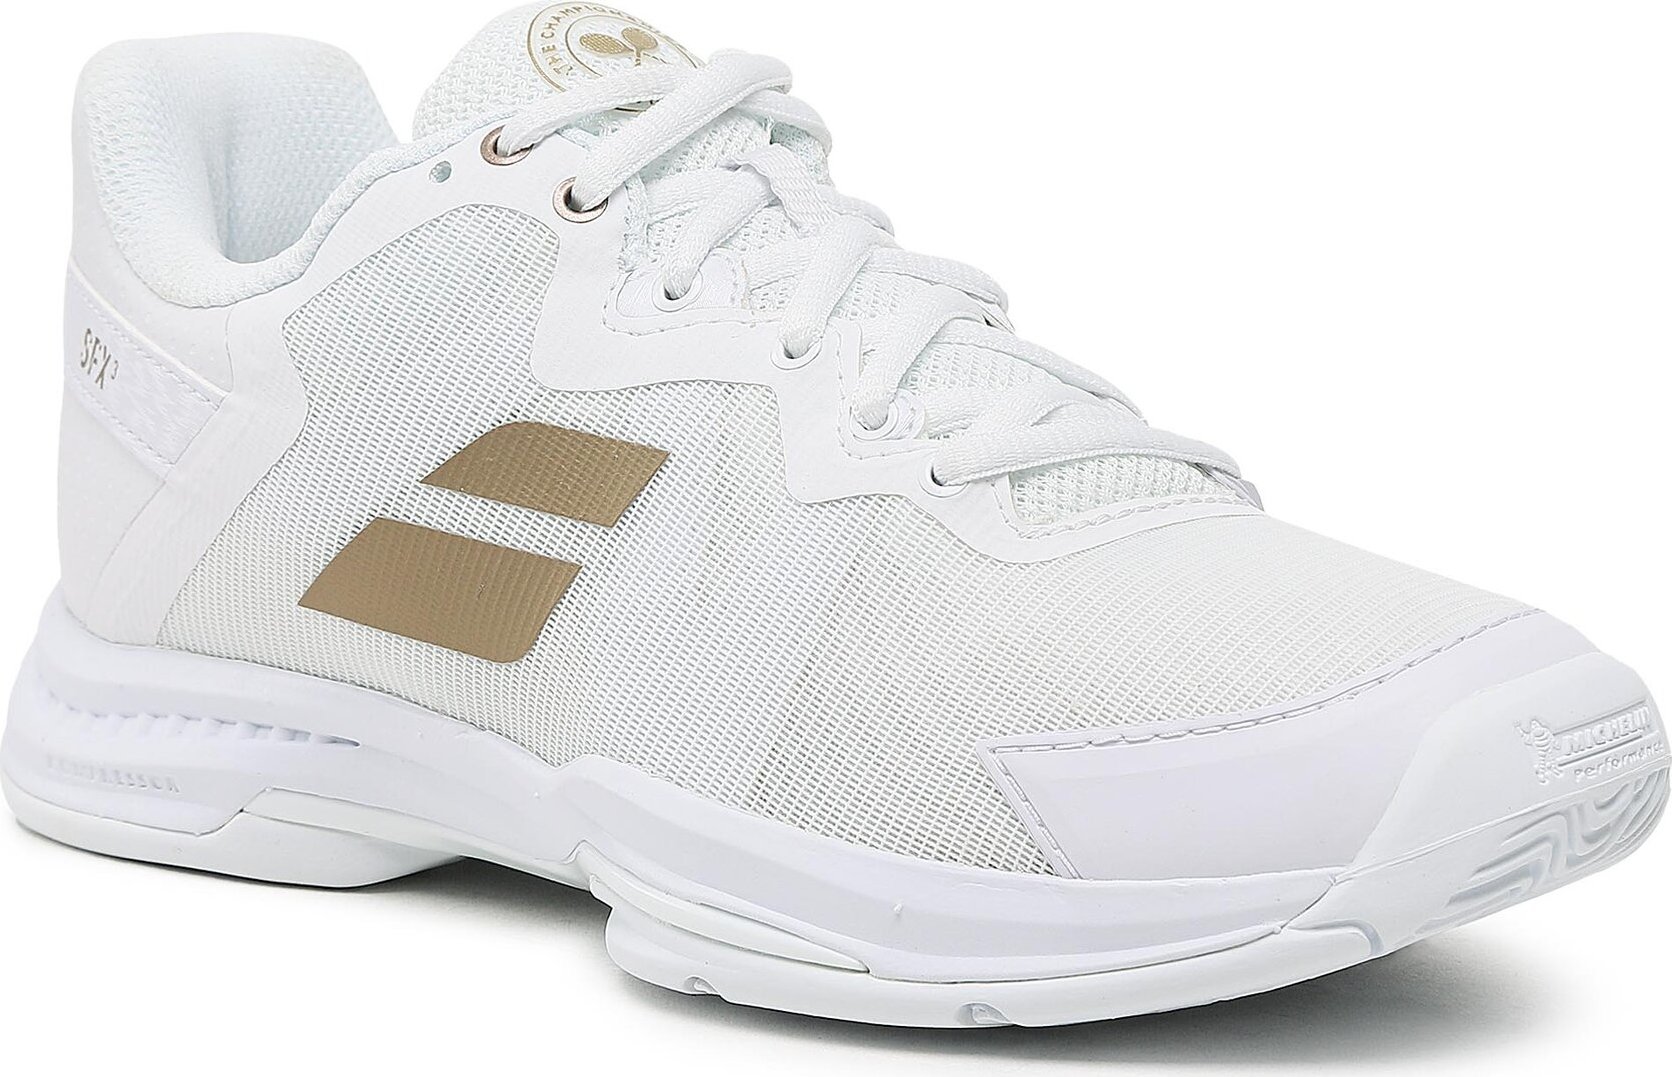 Topánky Babolat Sfx3 All Court Wim Women 31S23885 White/Gold